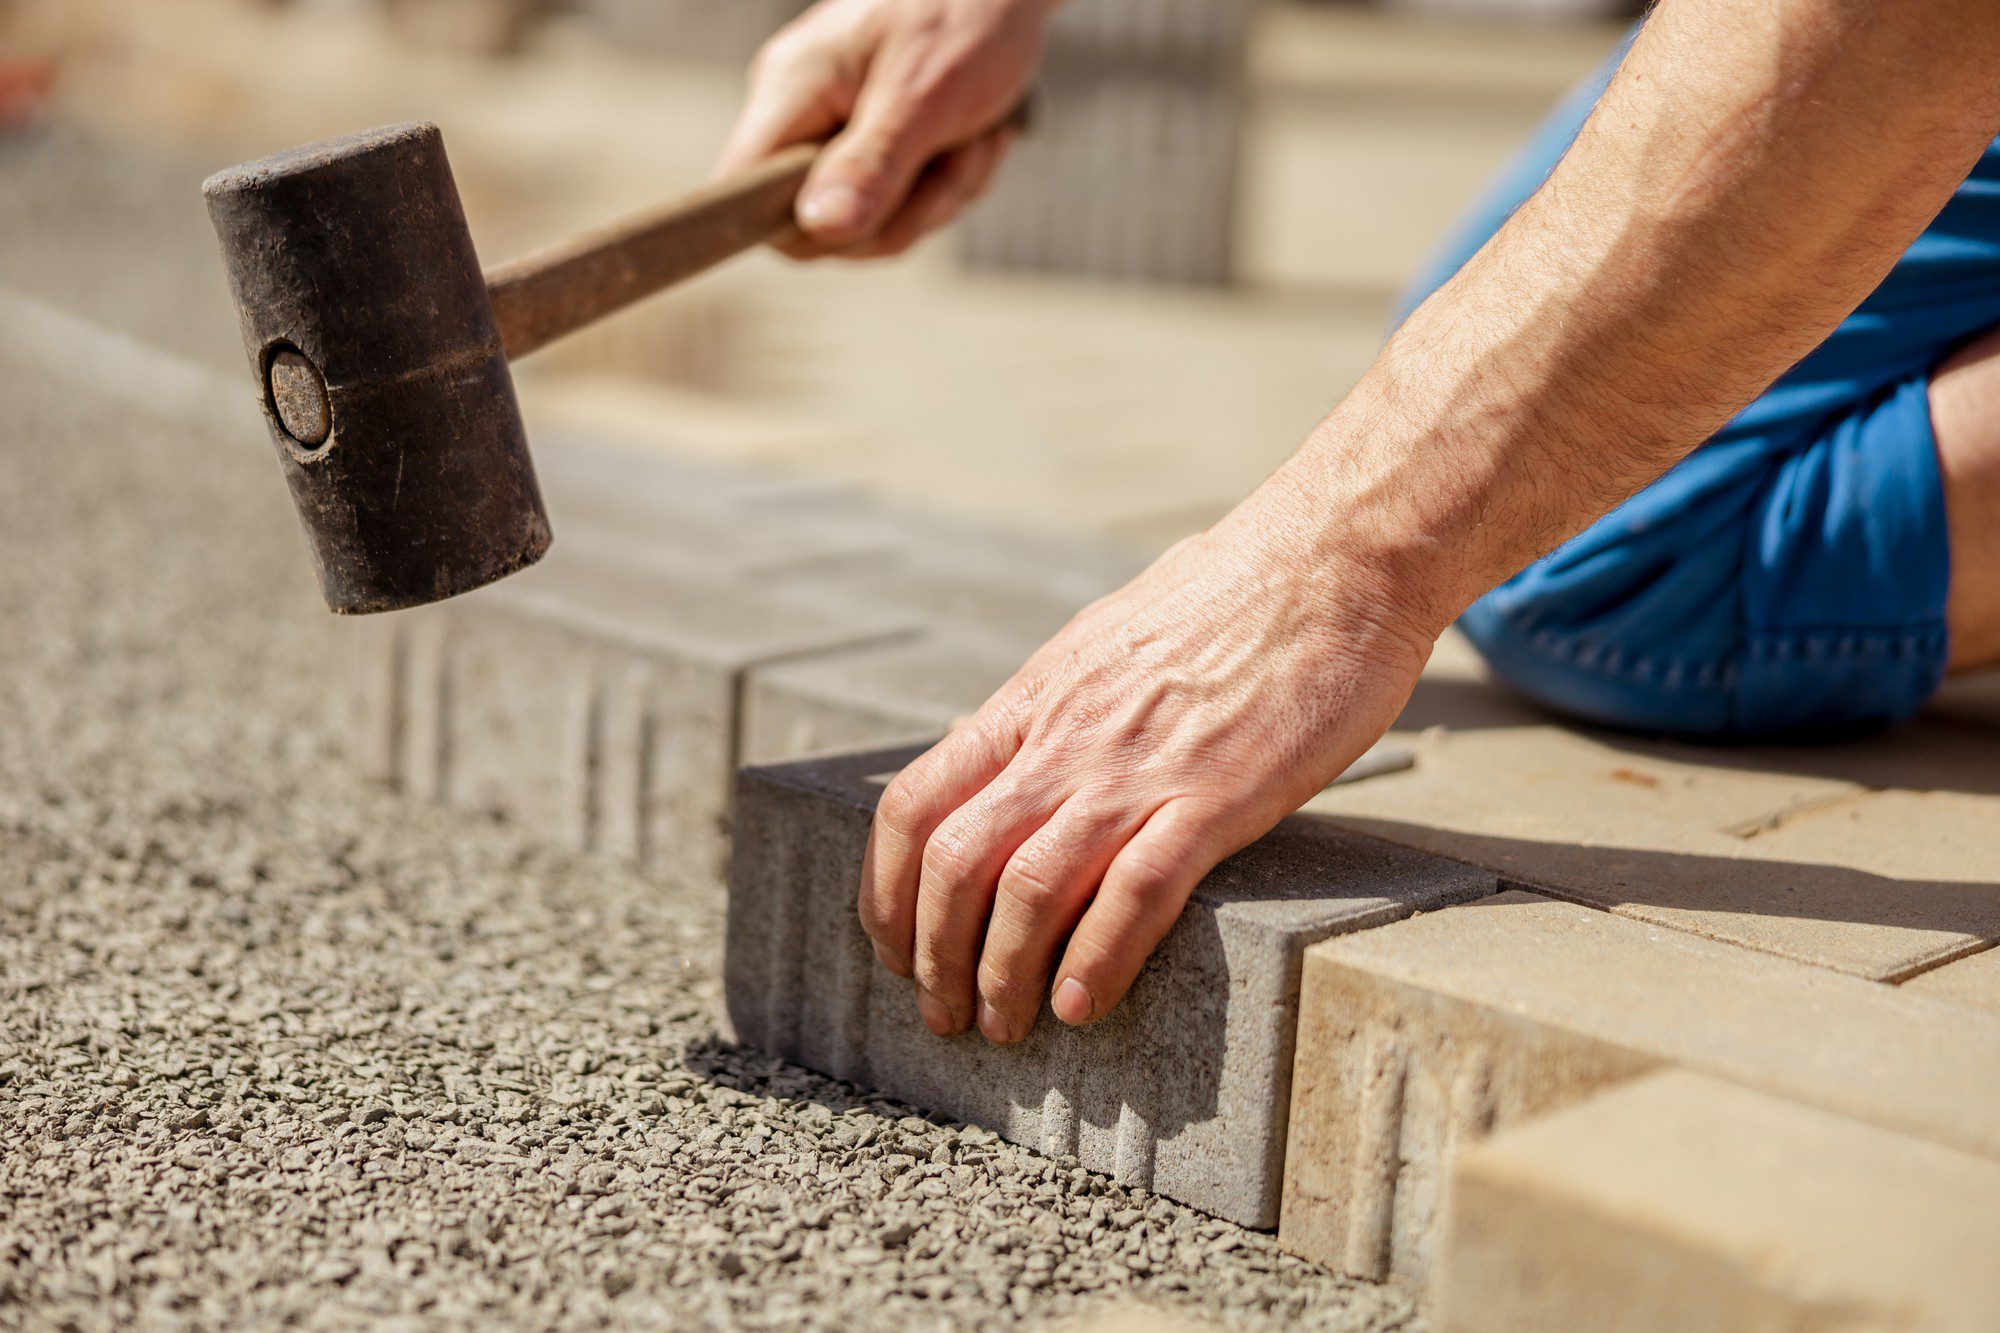 The image shows a close-up view of hands working on laying paving stones. One hand is adjusting a stone into place while the other hand is holding a mallet, about to tap the stone to set it firmly on the gravel or sand base. The person doing the work is wearing blue shorts, indicating they are likely dressed for outdoor, physical work. The focus on the hands and the pavers with the mallet in mid-motion suggests a dynamic scene of construction or landscaping work.